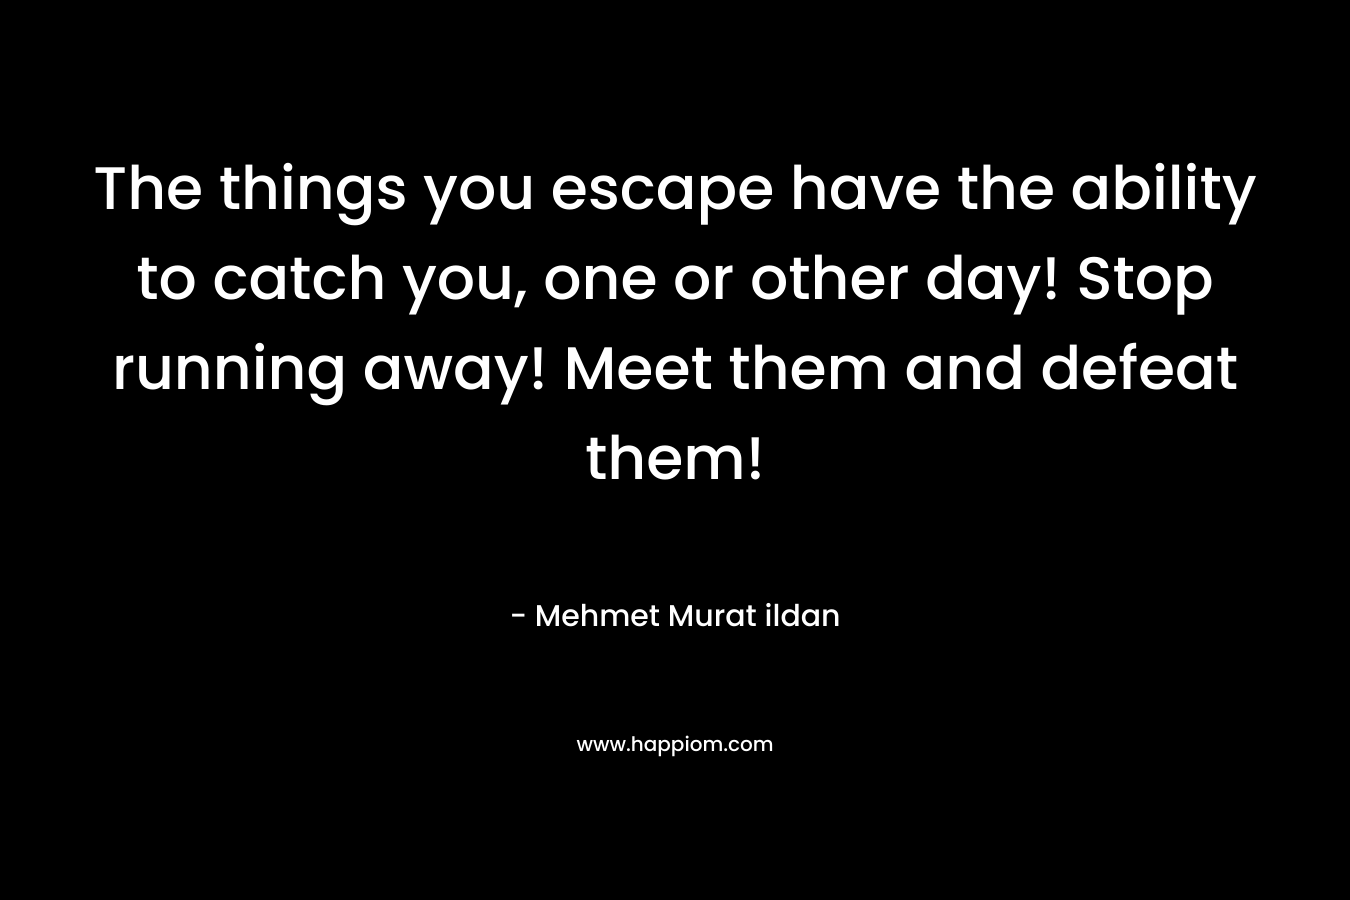 The things you escape have the ability to catch you, one or other day! Stop running away! Meet them and defeat them! – Mehmet Murat ildan